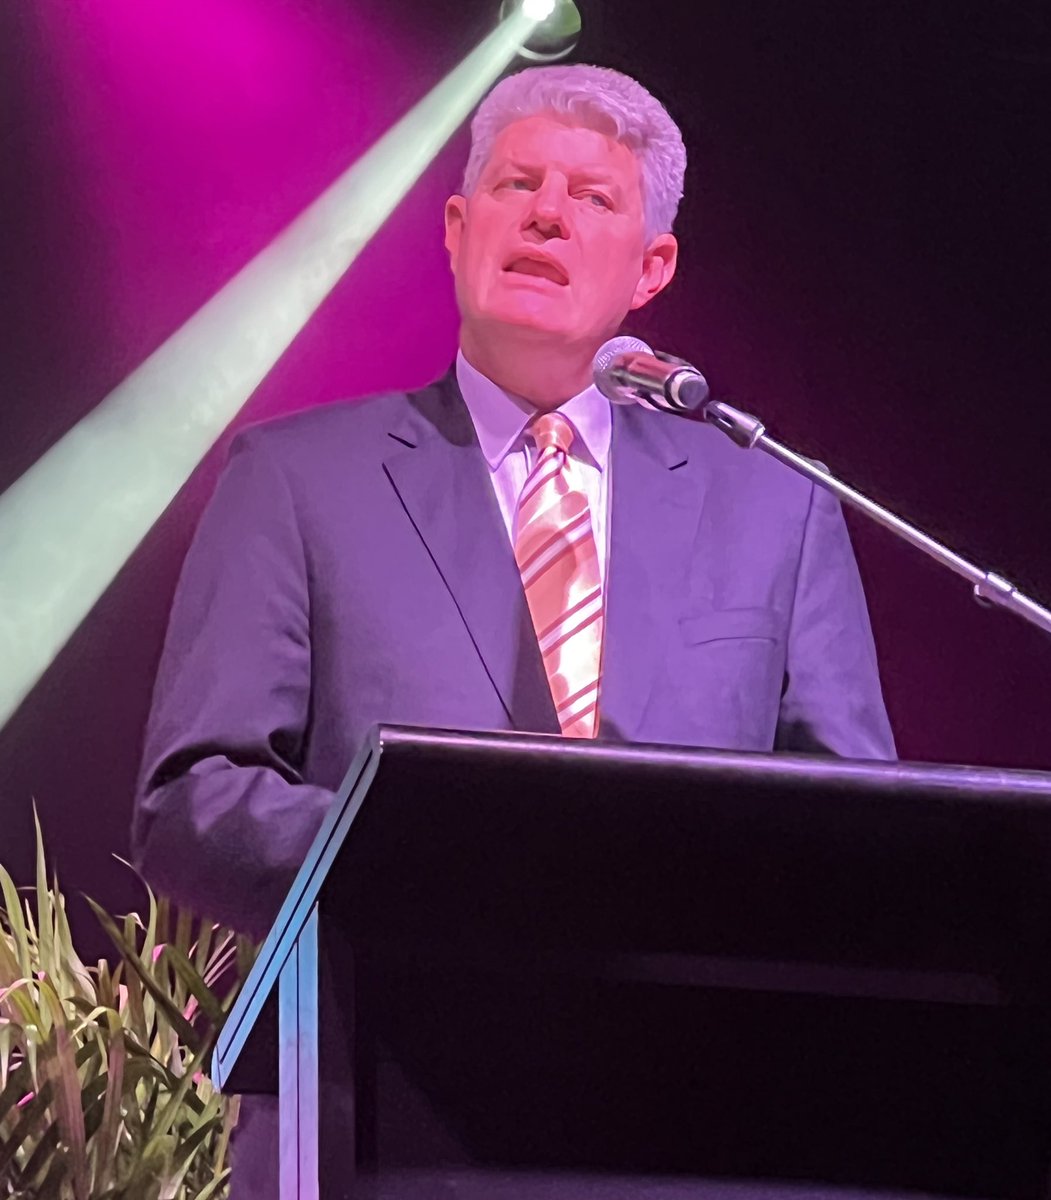 What got is here wont get us there! #QueenslandConnects Resilience round announced by @StirlHinchliffe. Looking forward to delivering this with @AdvanceQld. @QUT @QUTEship